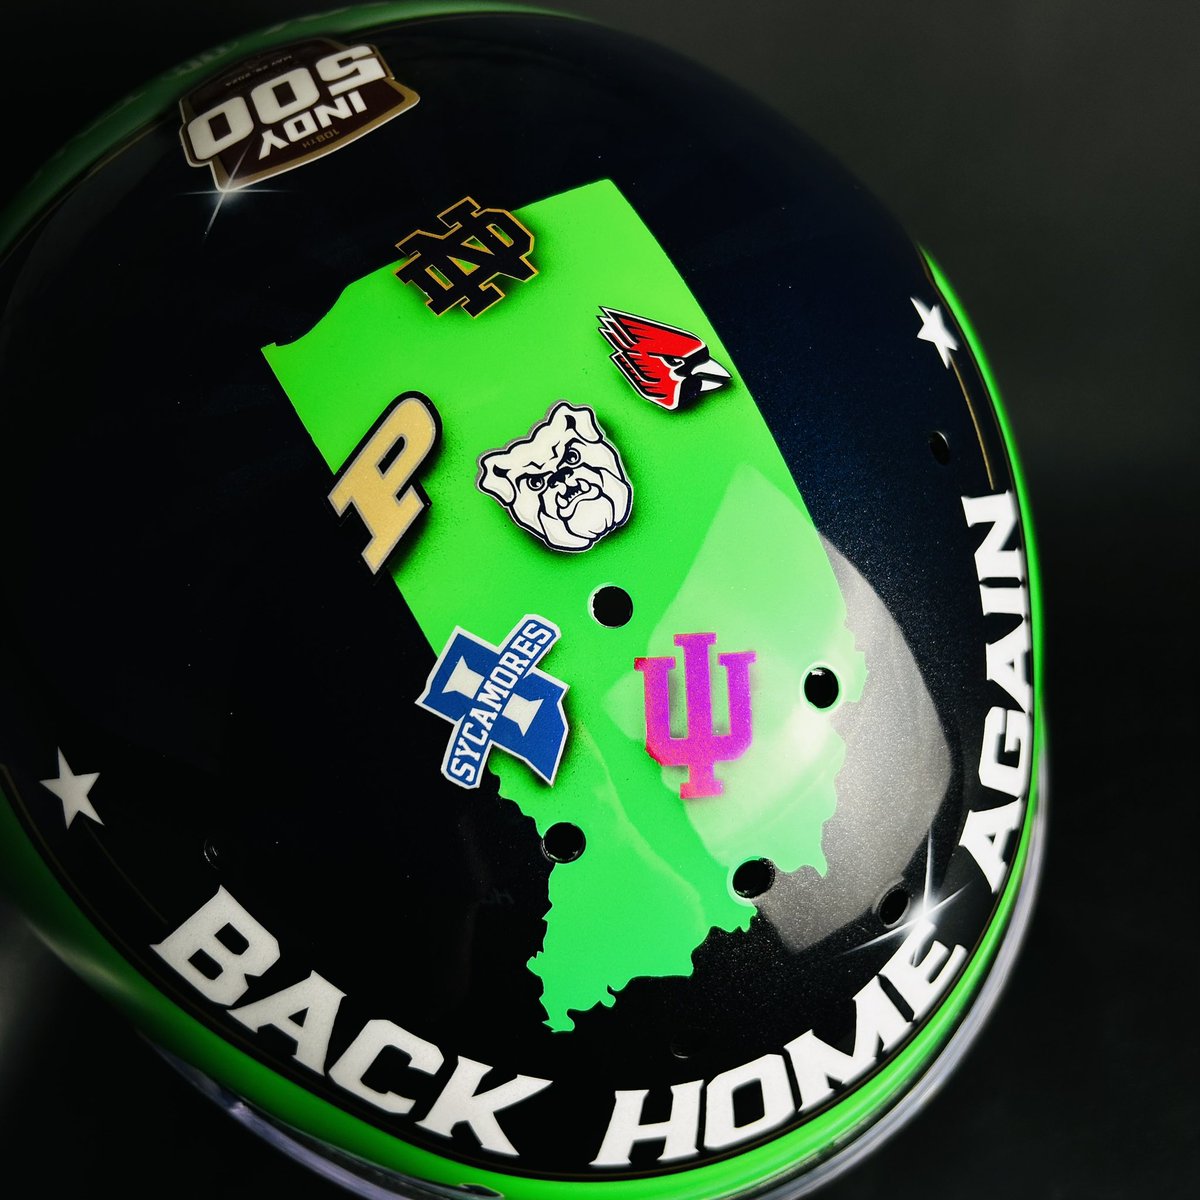 My #Indy500 helmet preview 👀 alllllll Indiana themed. The state is riding with me this year!